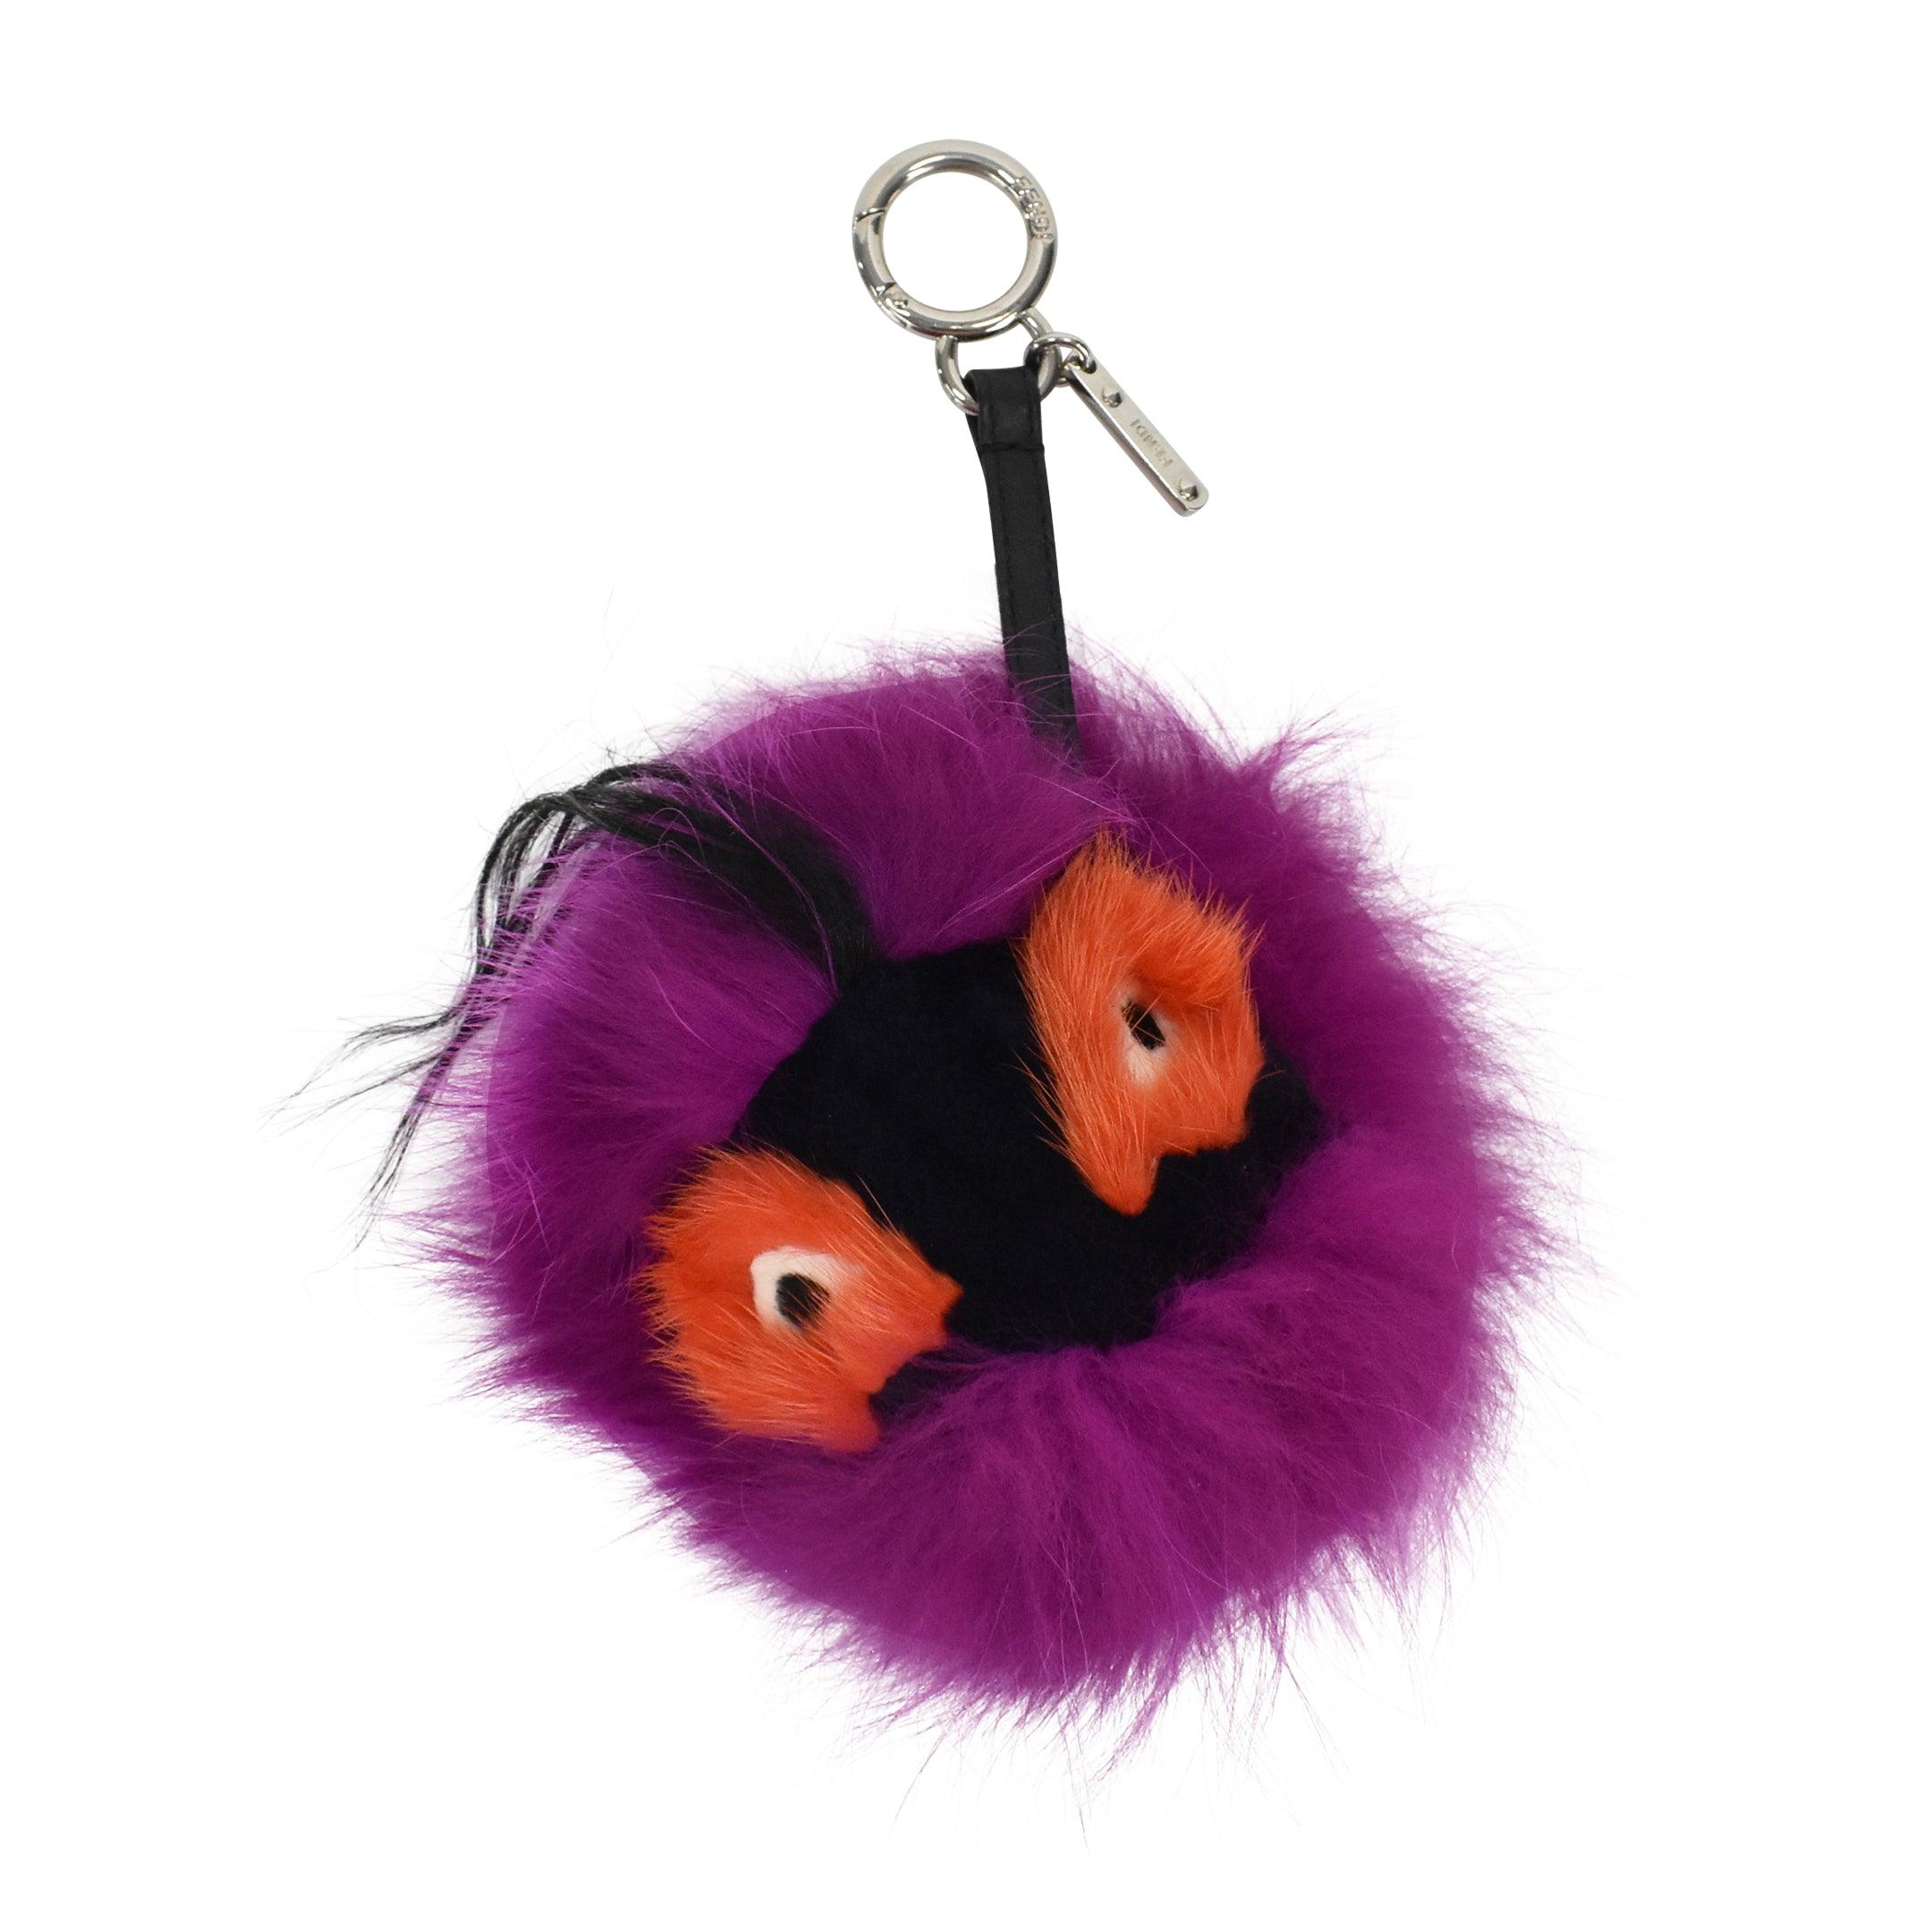 Fendi Monster Key Chain - Fashionably Yours